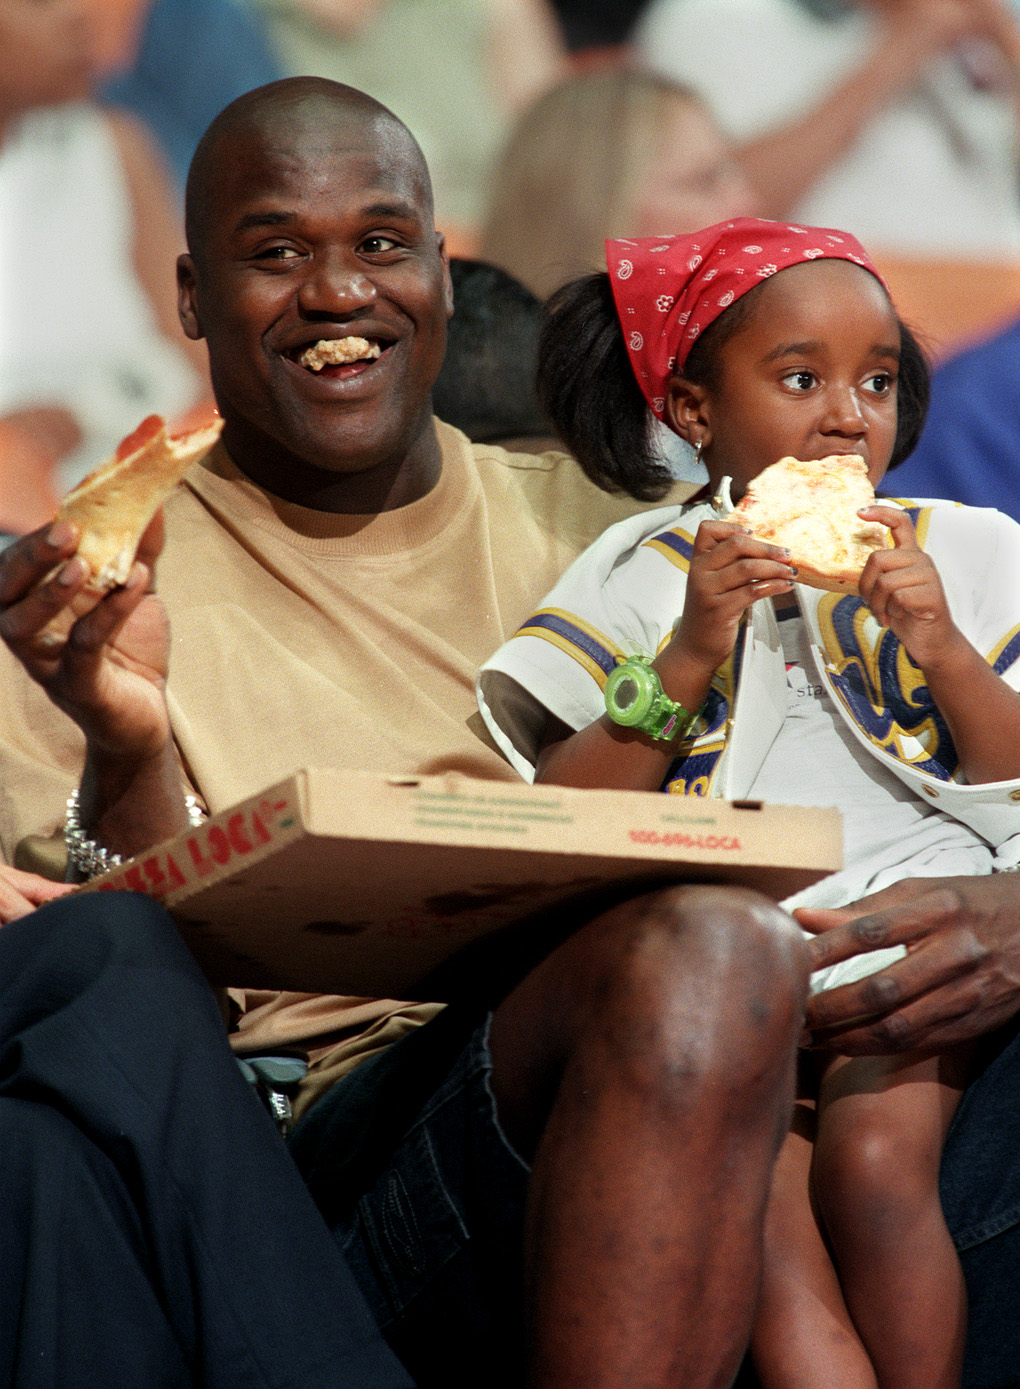 Shaquille O'Neal and his daughter Taahirah O'Neal eat pizza courtside at the LA Sparks WNBA game on June 20, 2000. | Source: Getty Images